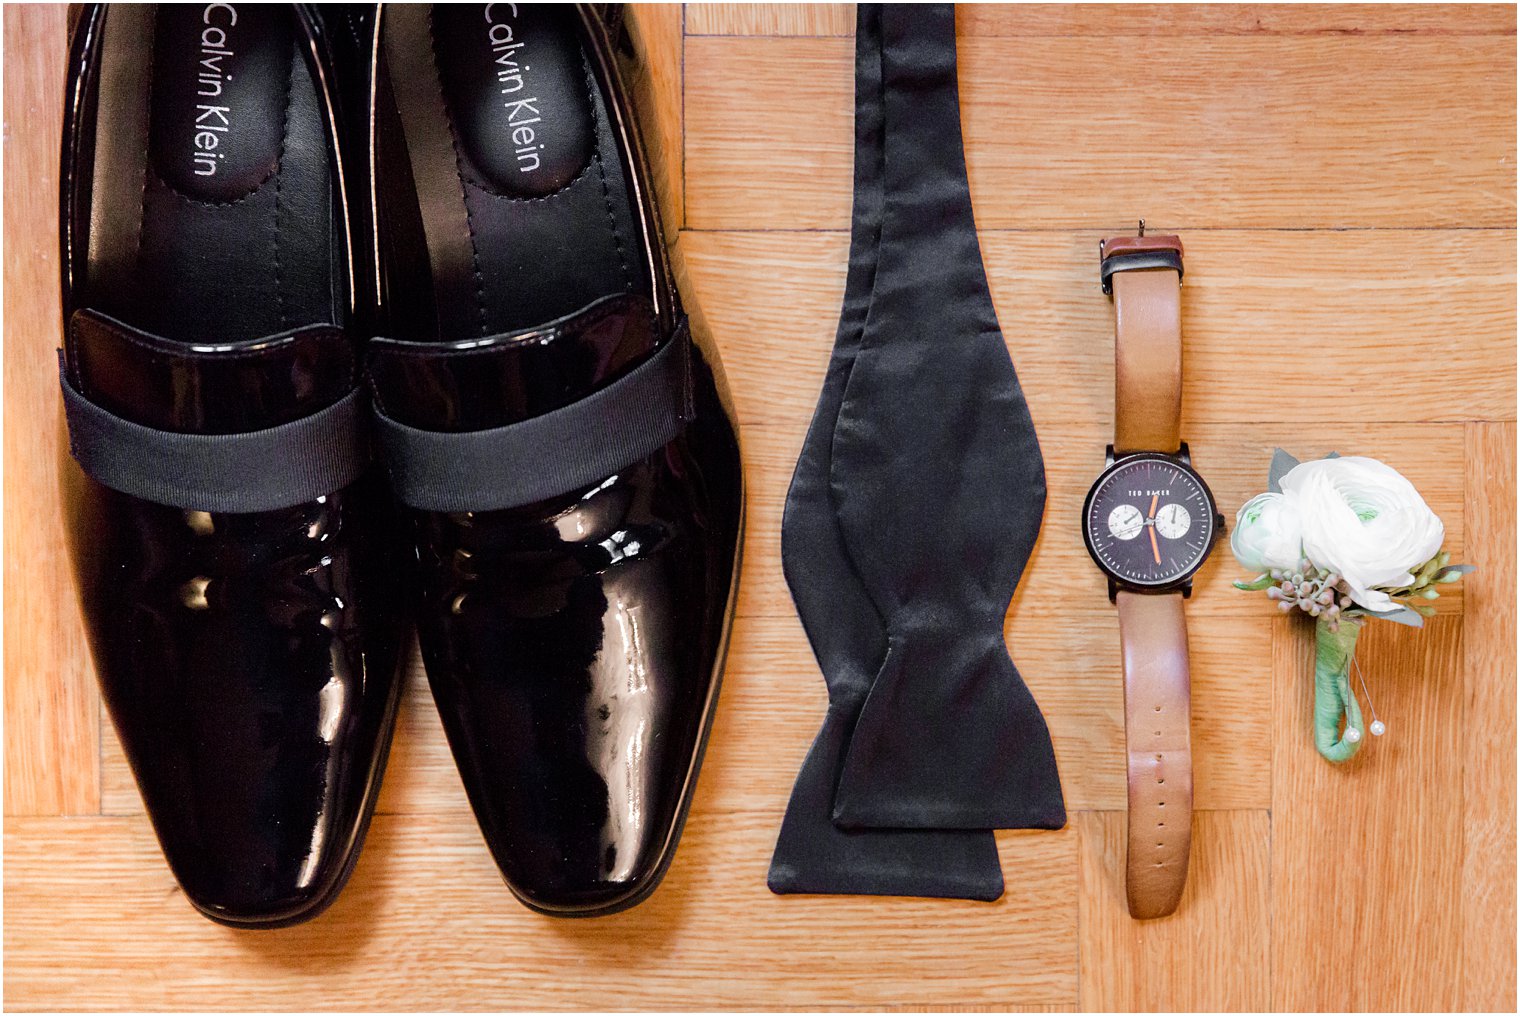 groom shoe, bow tie, watch, and boutonniere